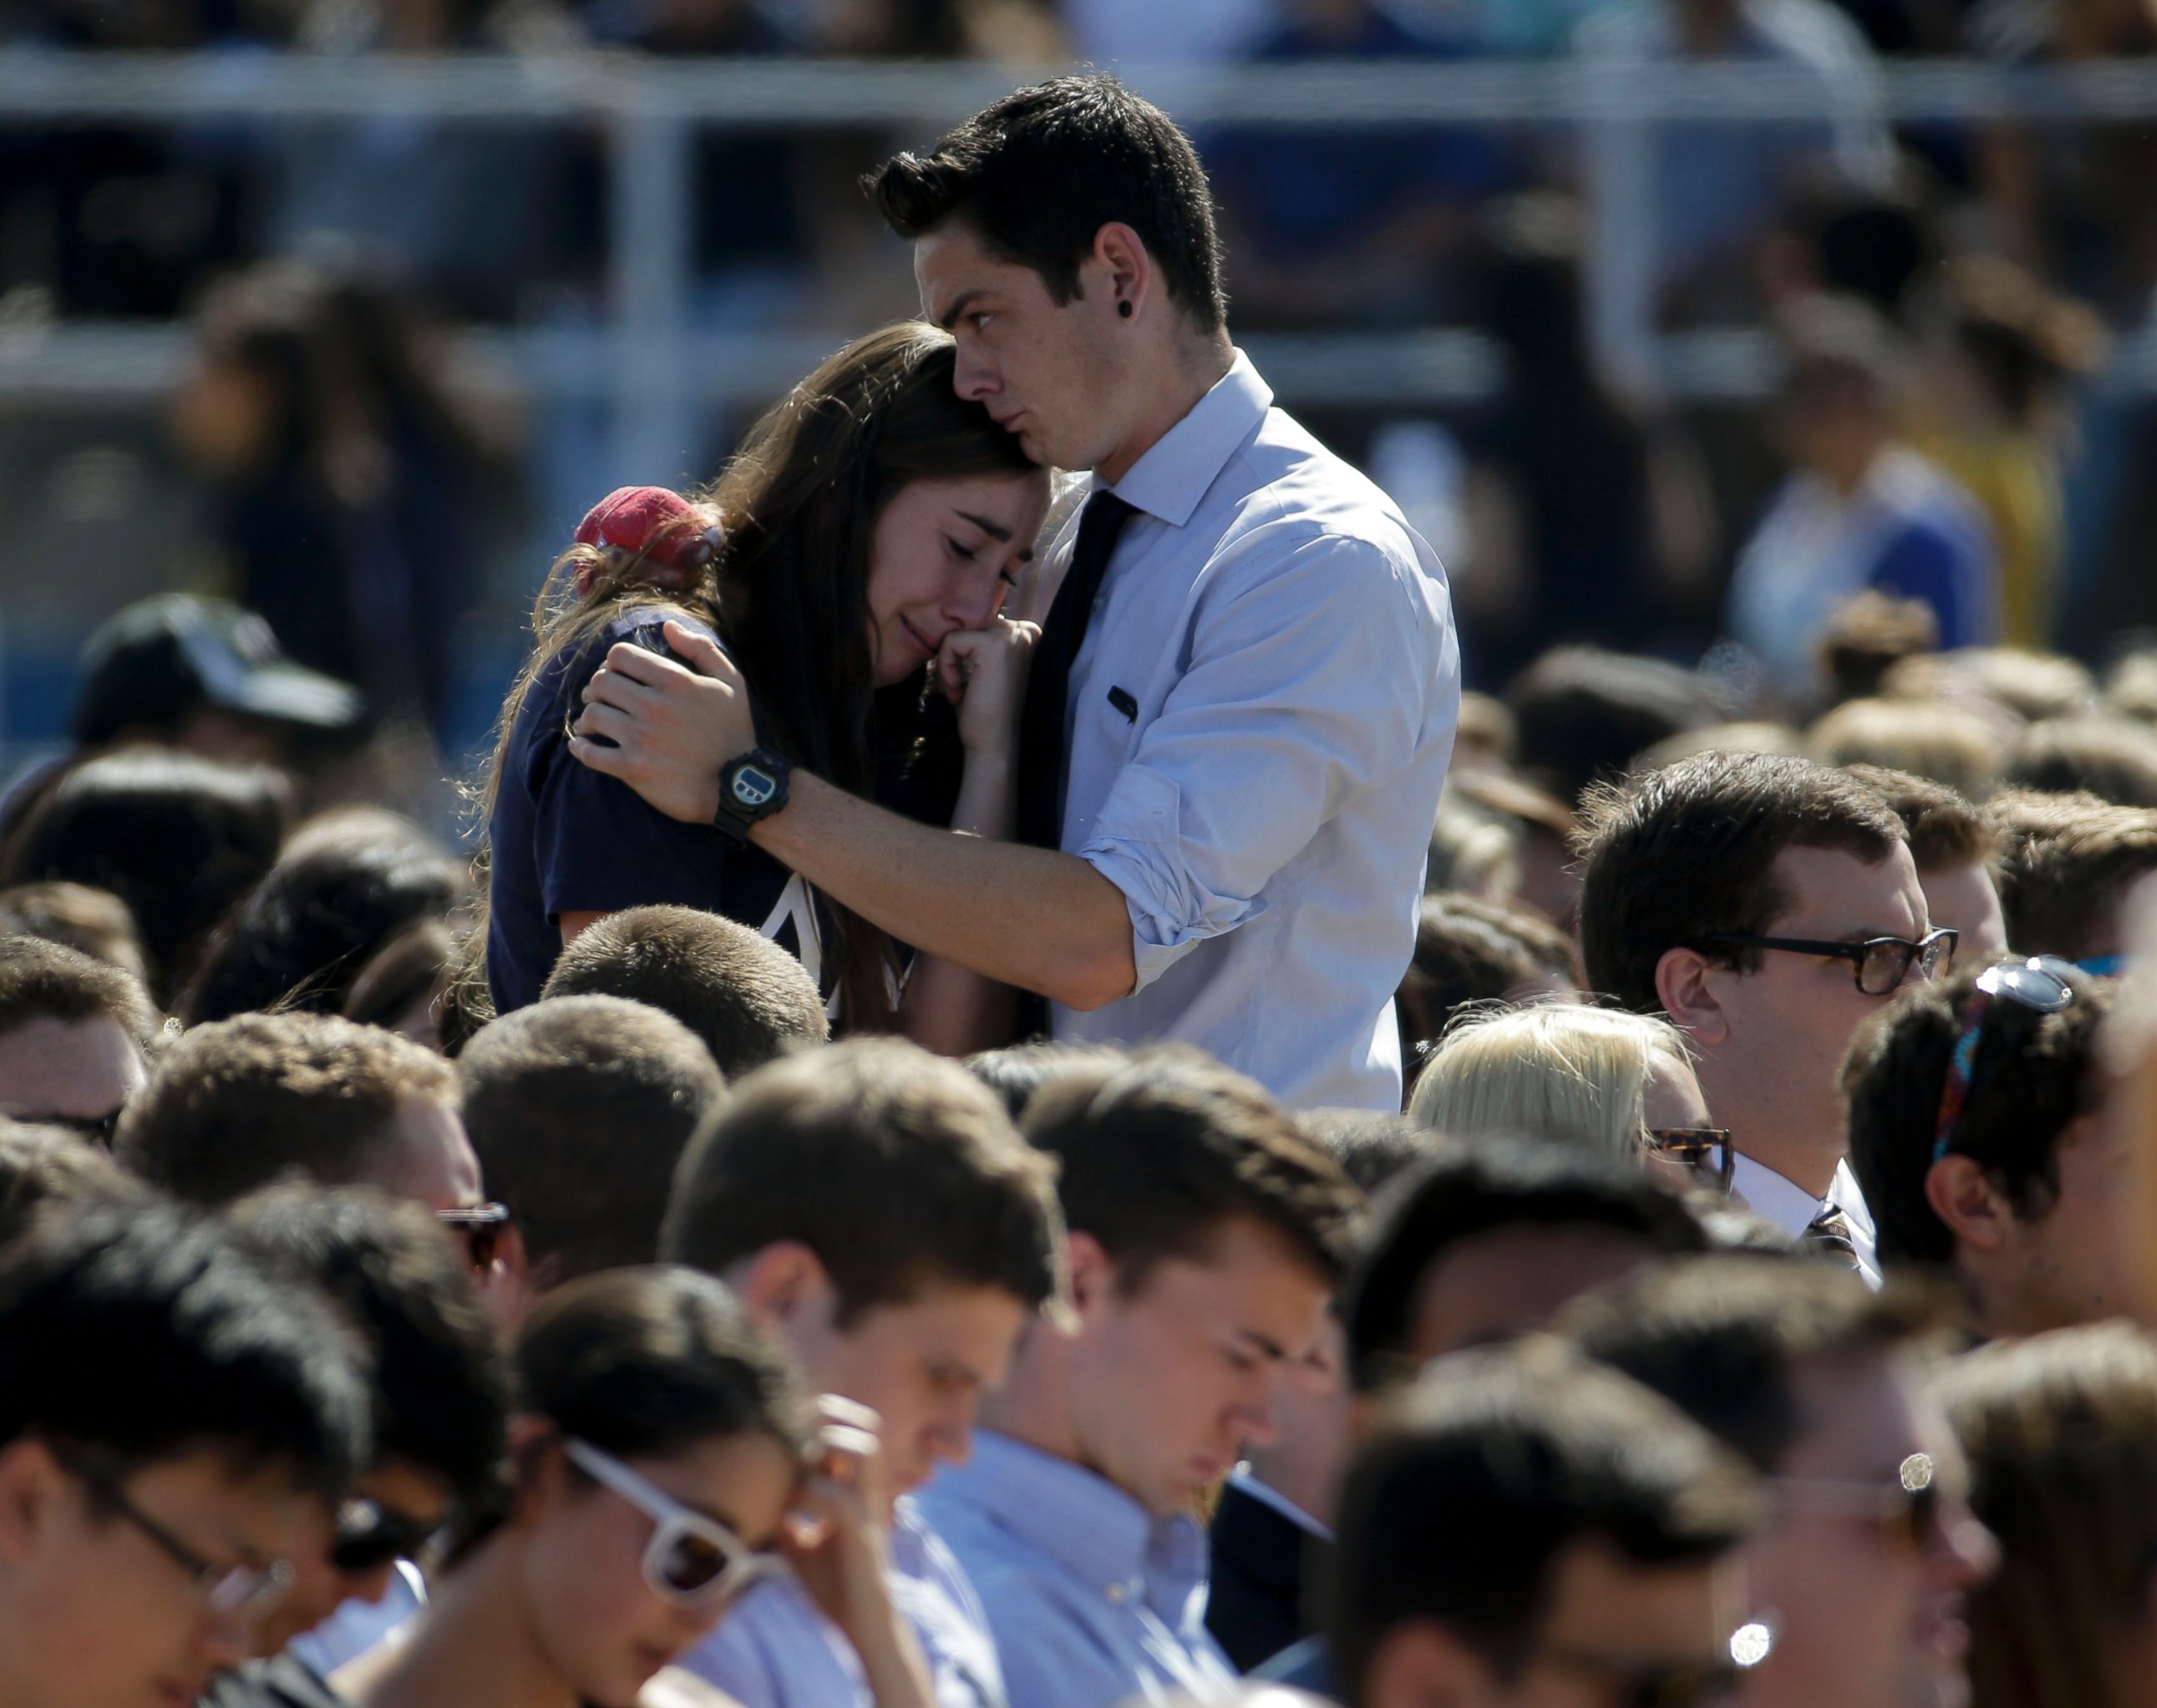 PHOTO: A couple embraces before a memorial service at Harder Stadium on the campus of University of California, Santa Barbara, May 27, 2014.